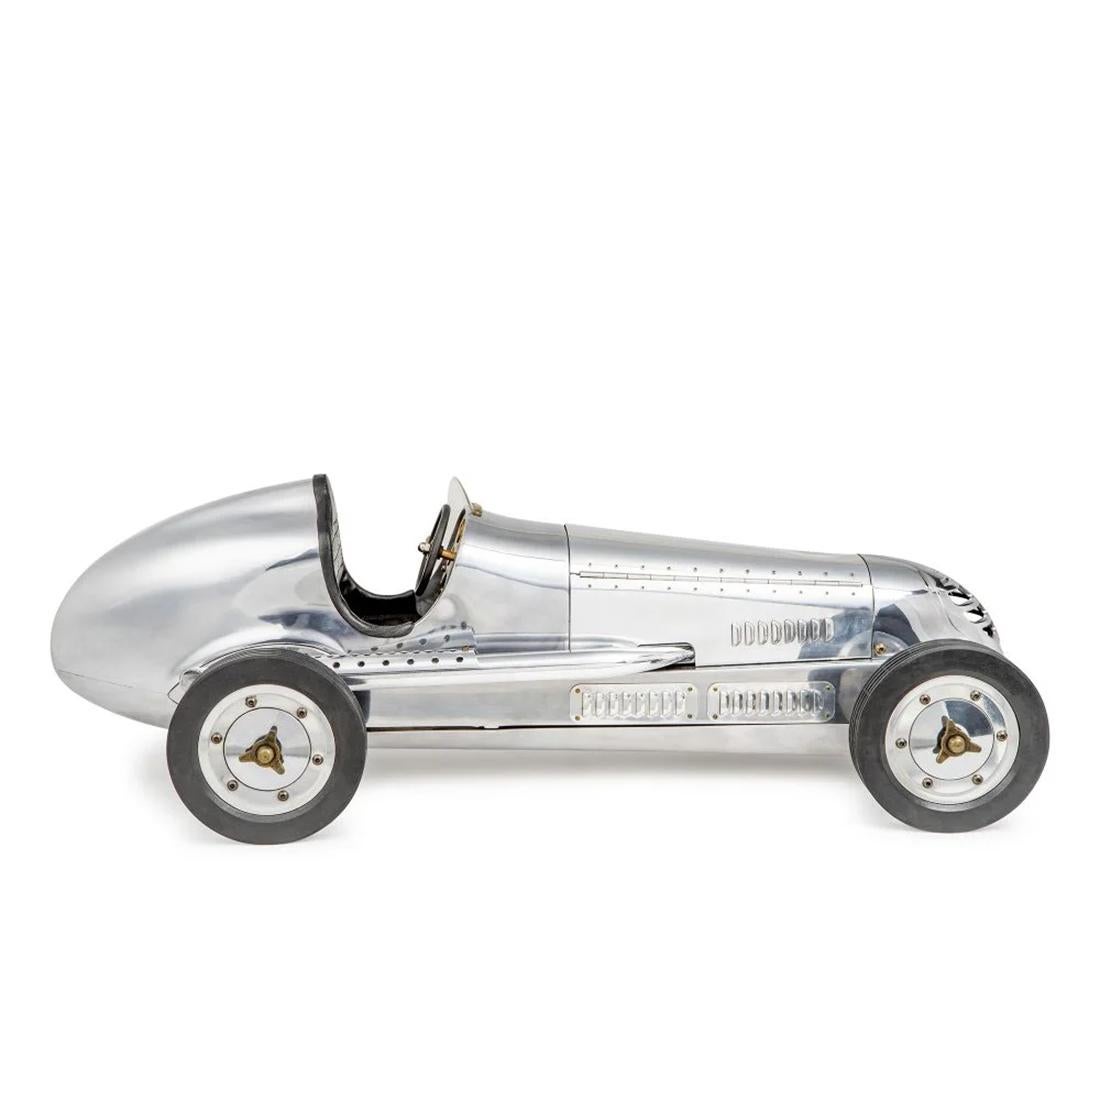 Model Spindizzies polished racing with aluminium 
structure, with plastic and aluminium details. Model 
in polished aluminium finish.